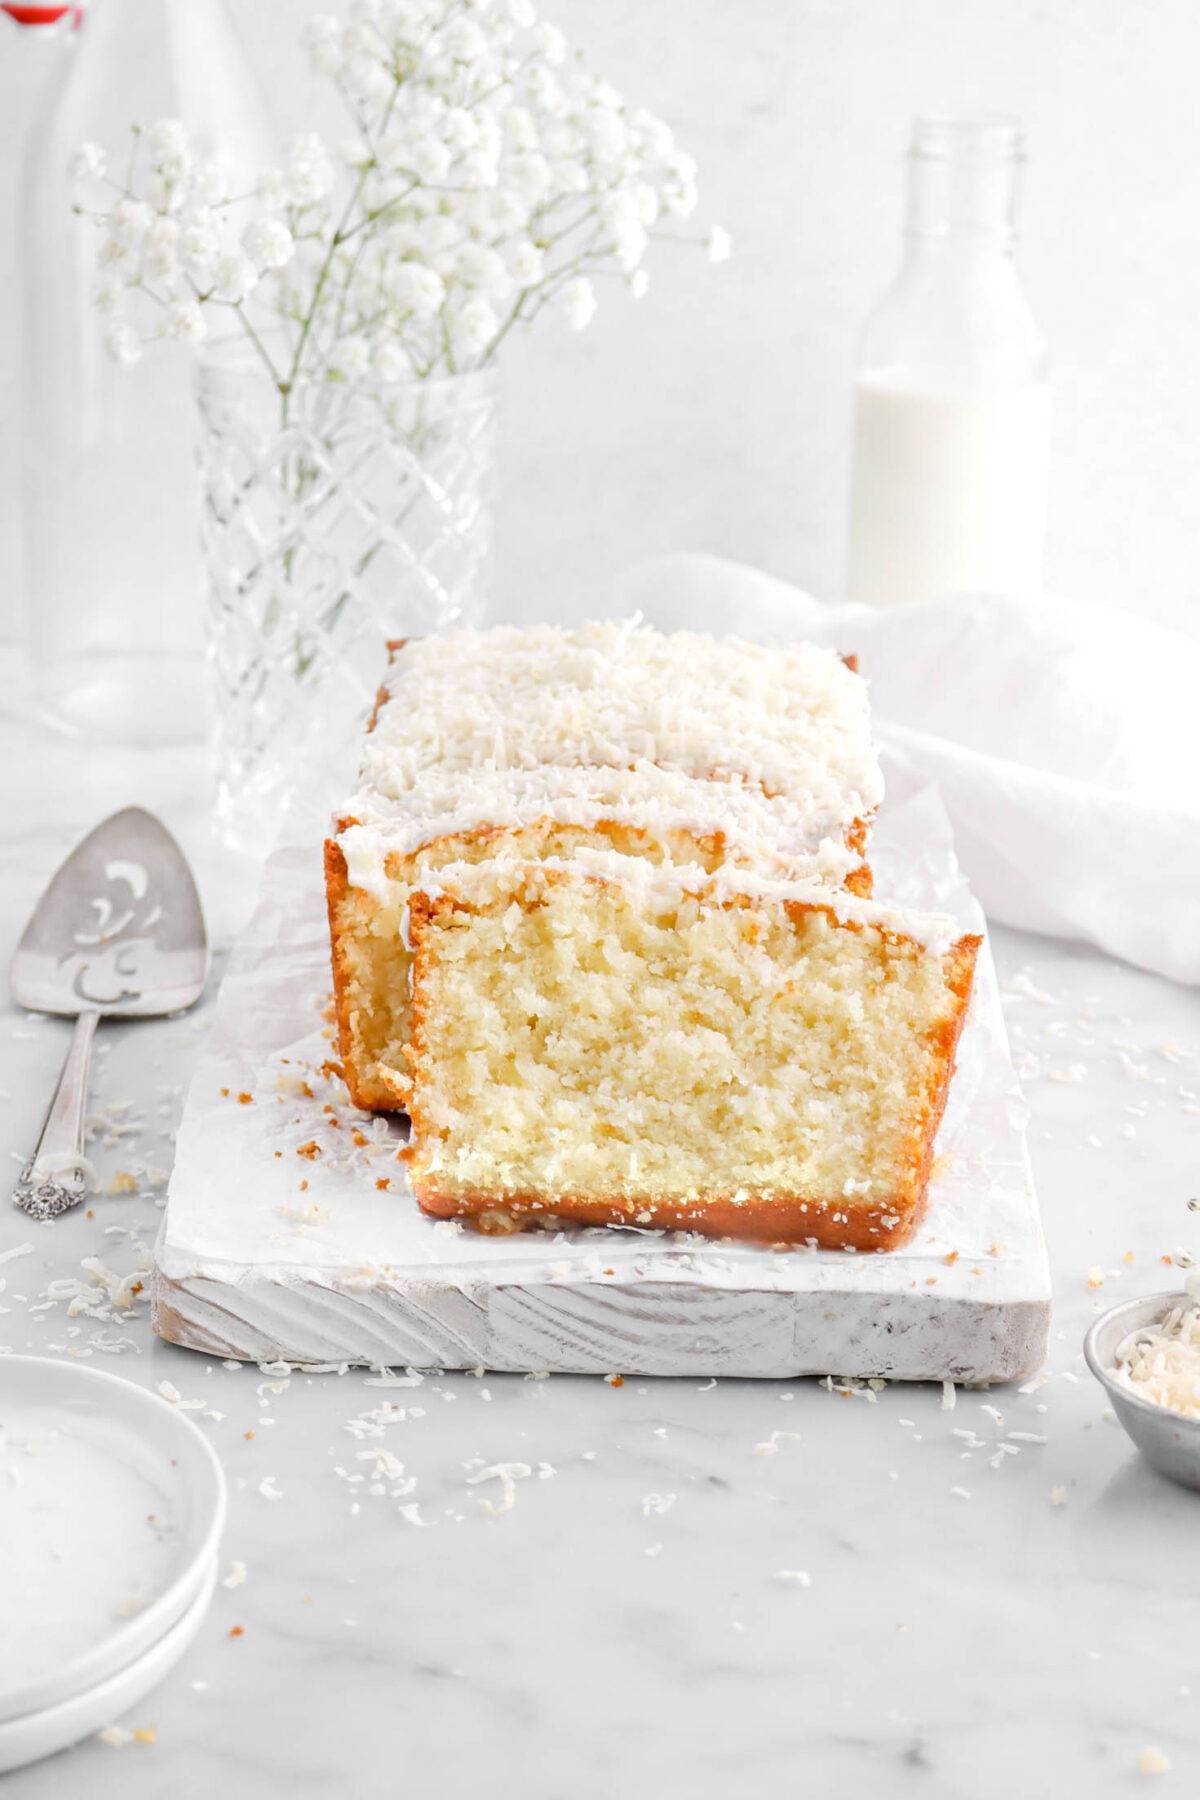 slice of coconut loaf cake leaning against loaf on white wood board with shredded coconut around, a cake knife beside, and white flowers behind with a glass of milk.